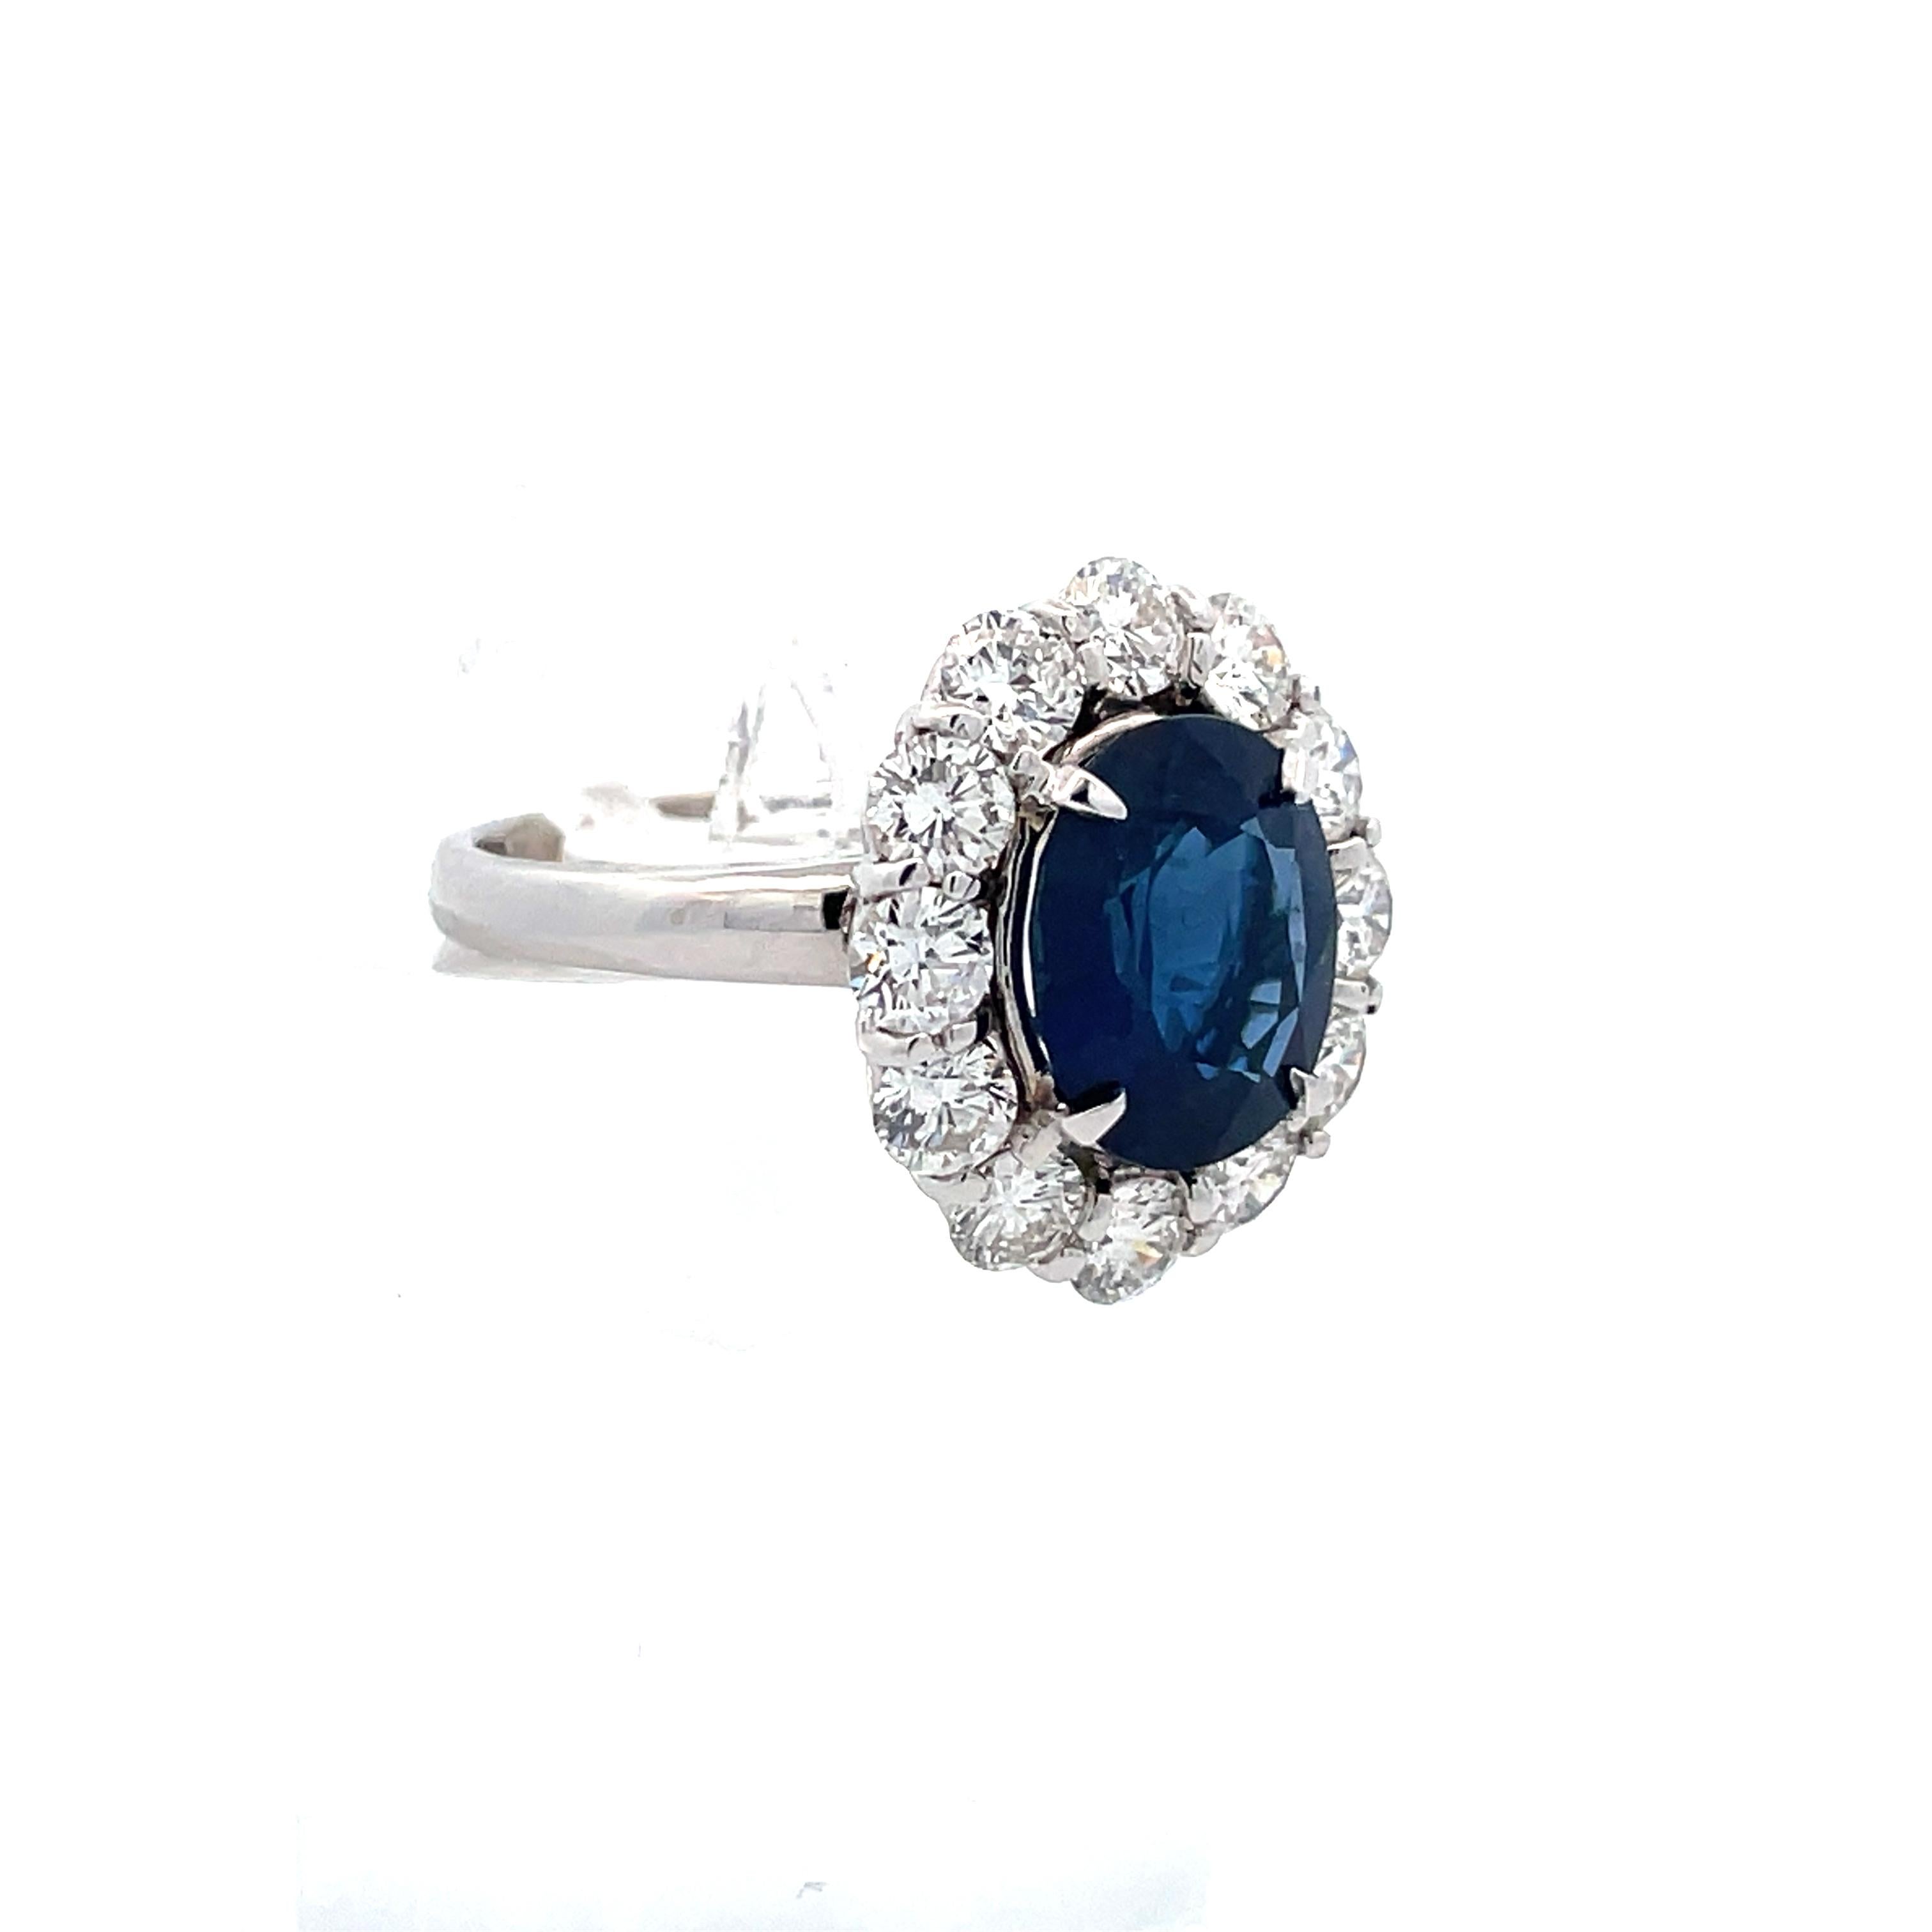  14K White Gold Contemporary Lady Di Ring Blue Sapphire and Diamond  For Sale 1